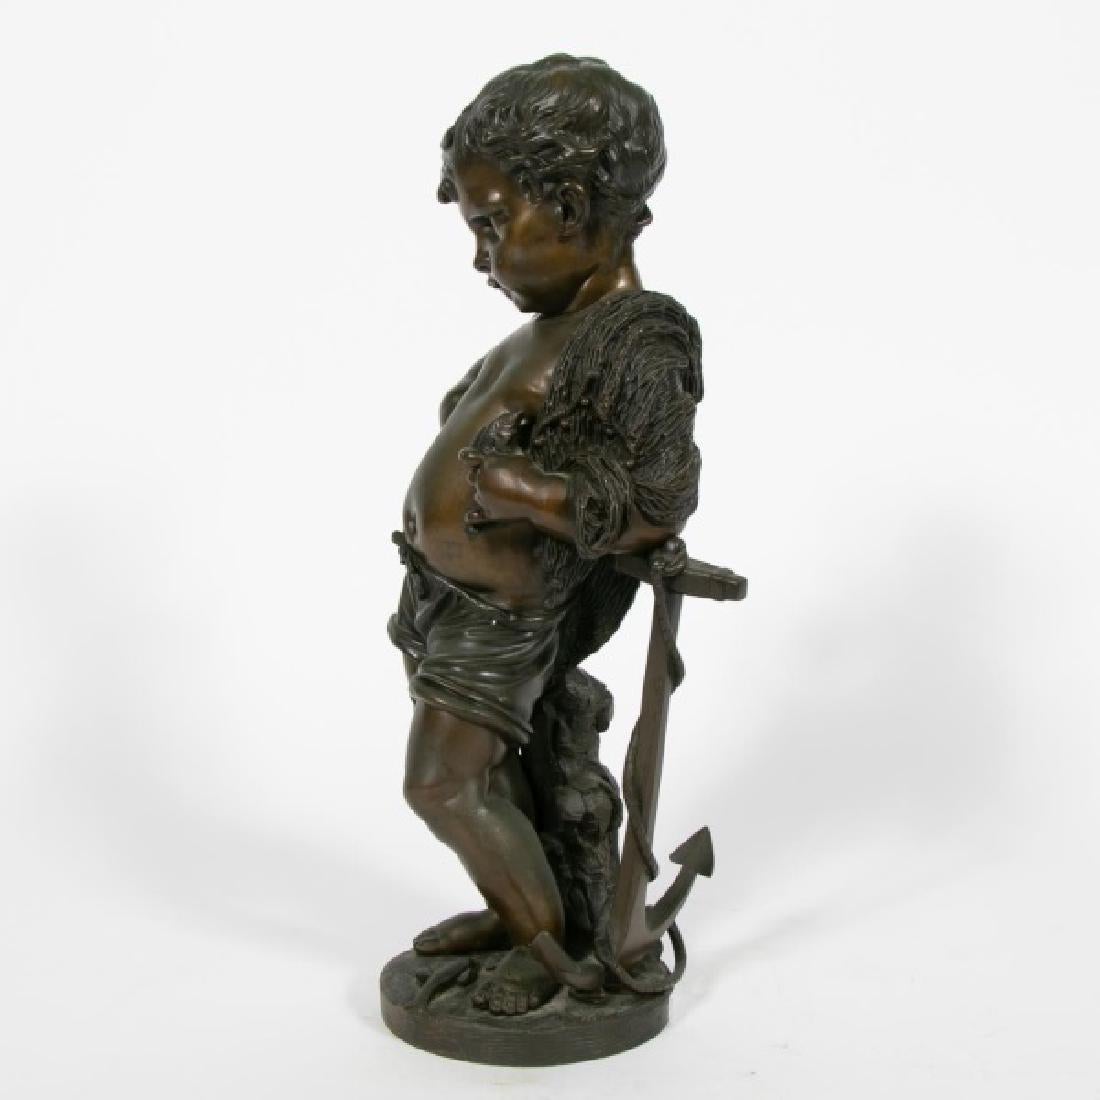 Late 19th-20th century, Continental school, French; cast bronze sculpture; depicting a well modeled figure of a young boy, draped in a net, his arm resting on an anchor, holding a fish; on a circular base with sea life. Signed 